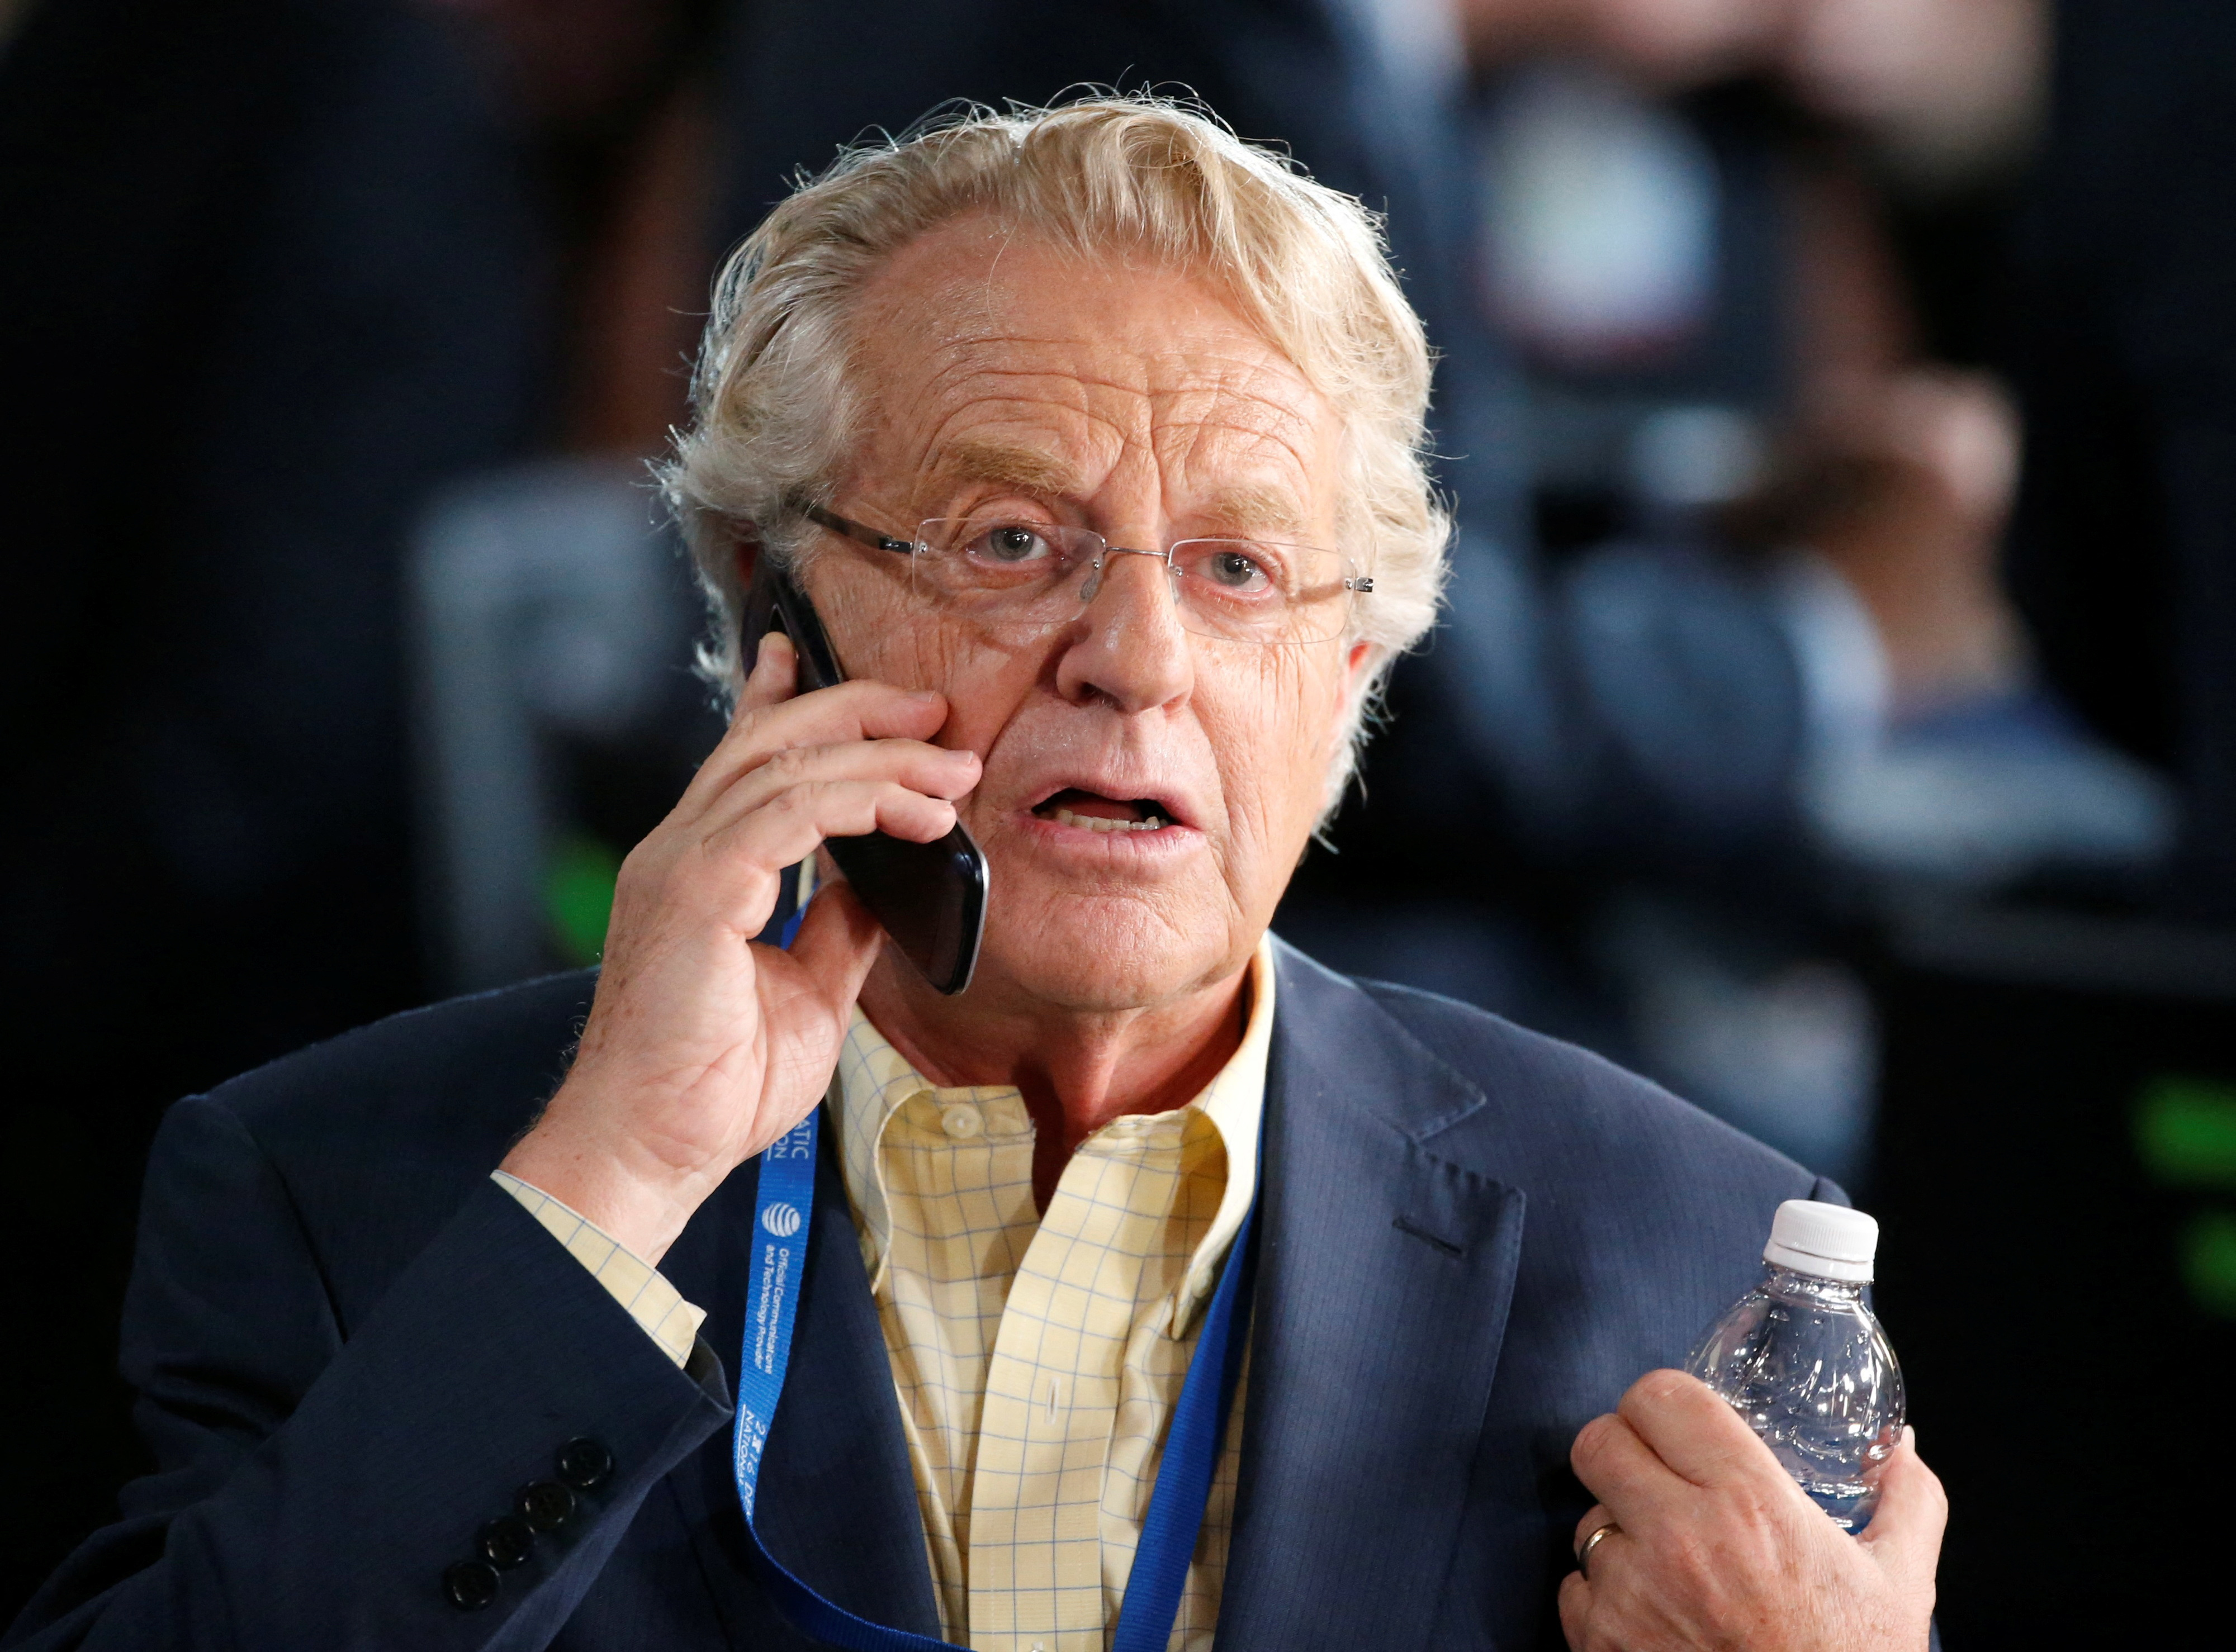 Television personality Jerry Springer at the Democratic National Convention...